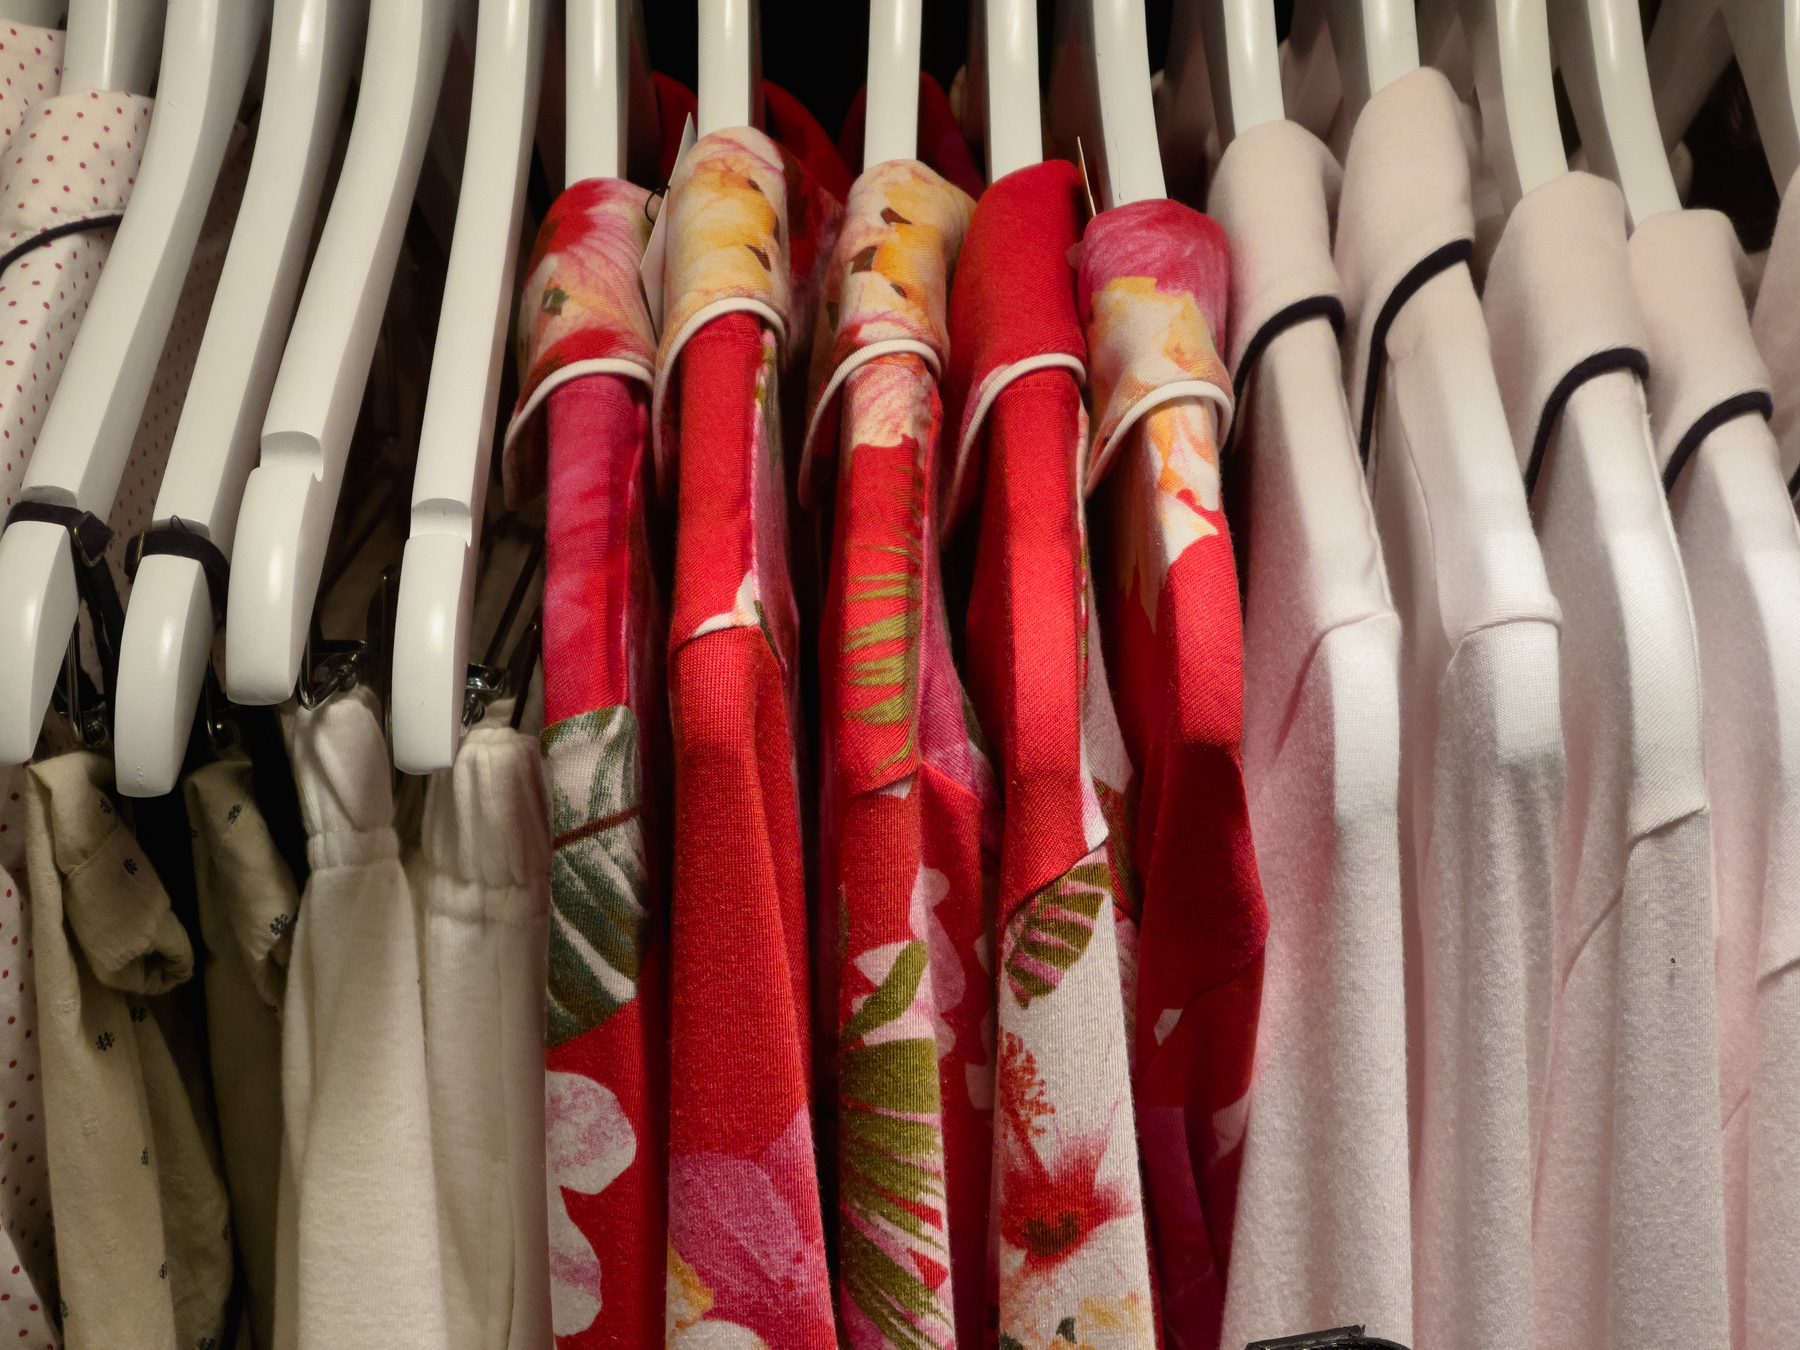 Dresses on dress rack, red in the middle, white at the ends.